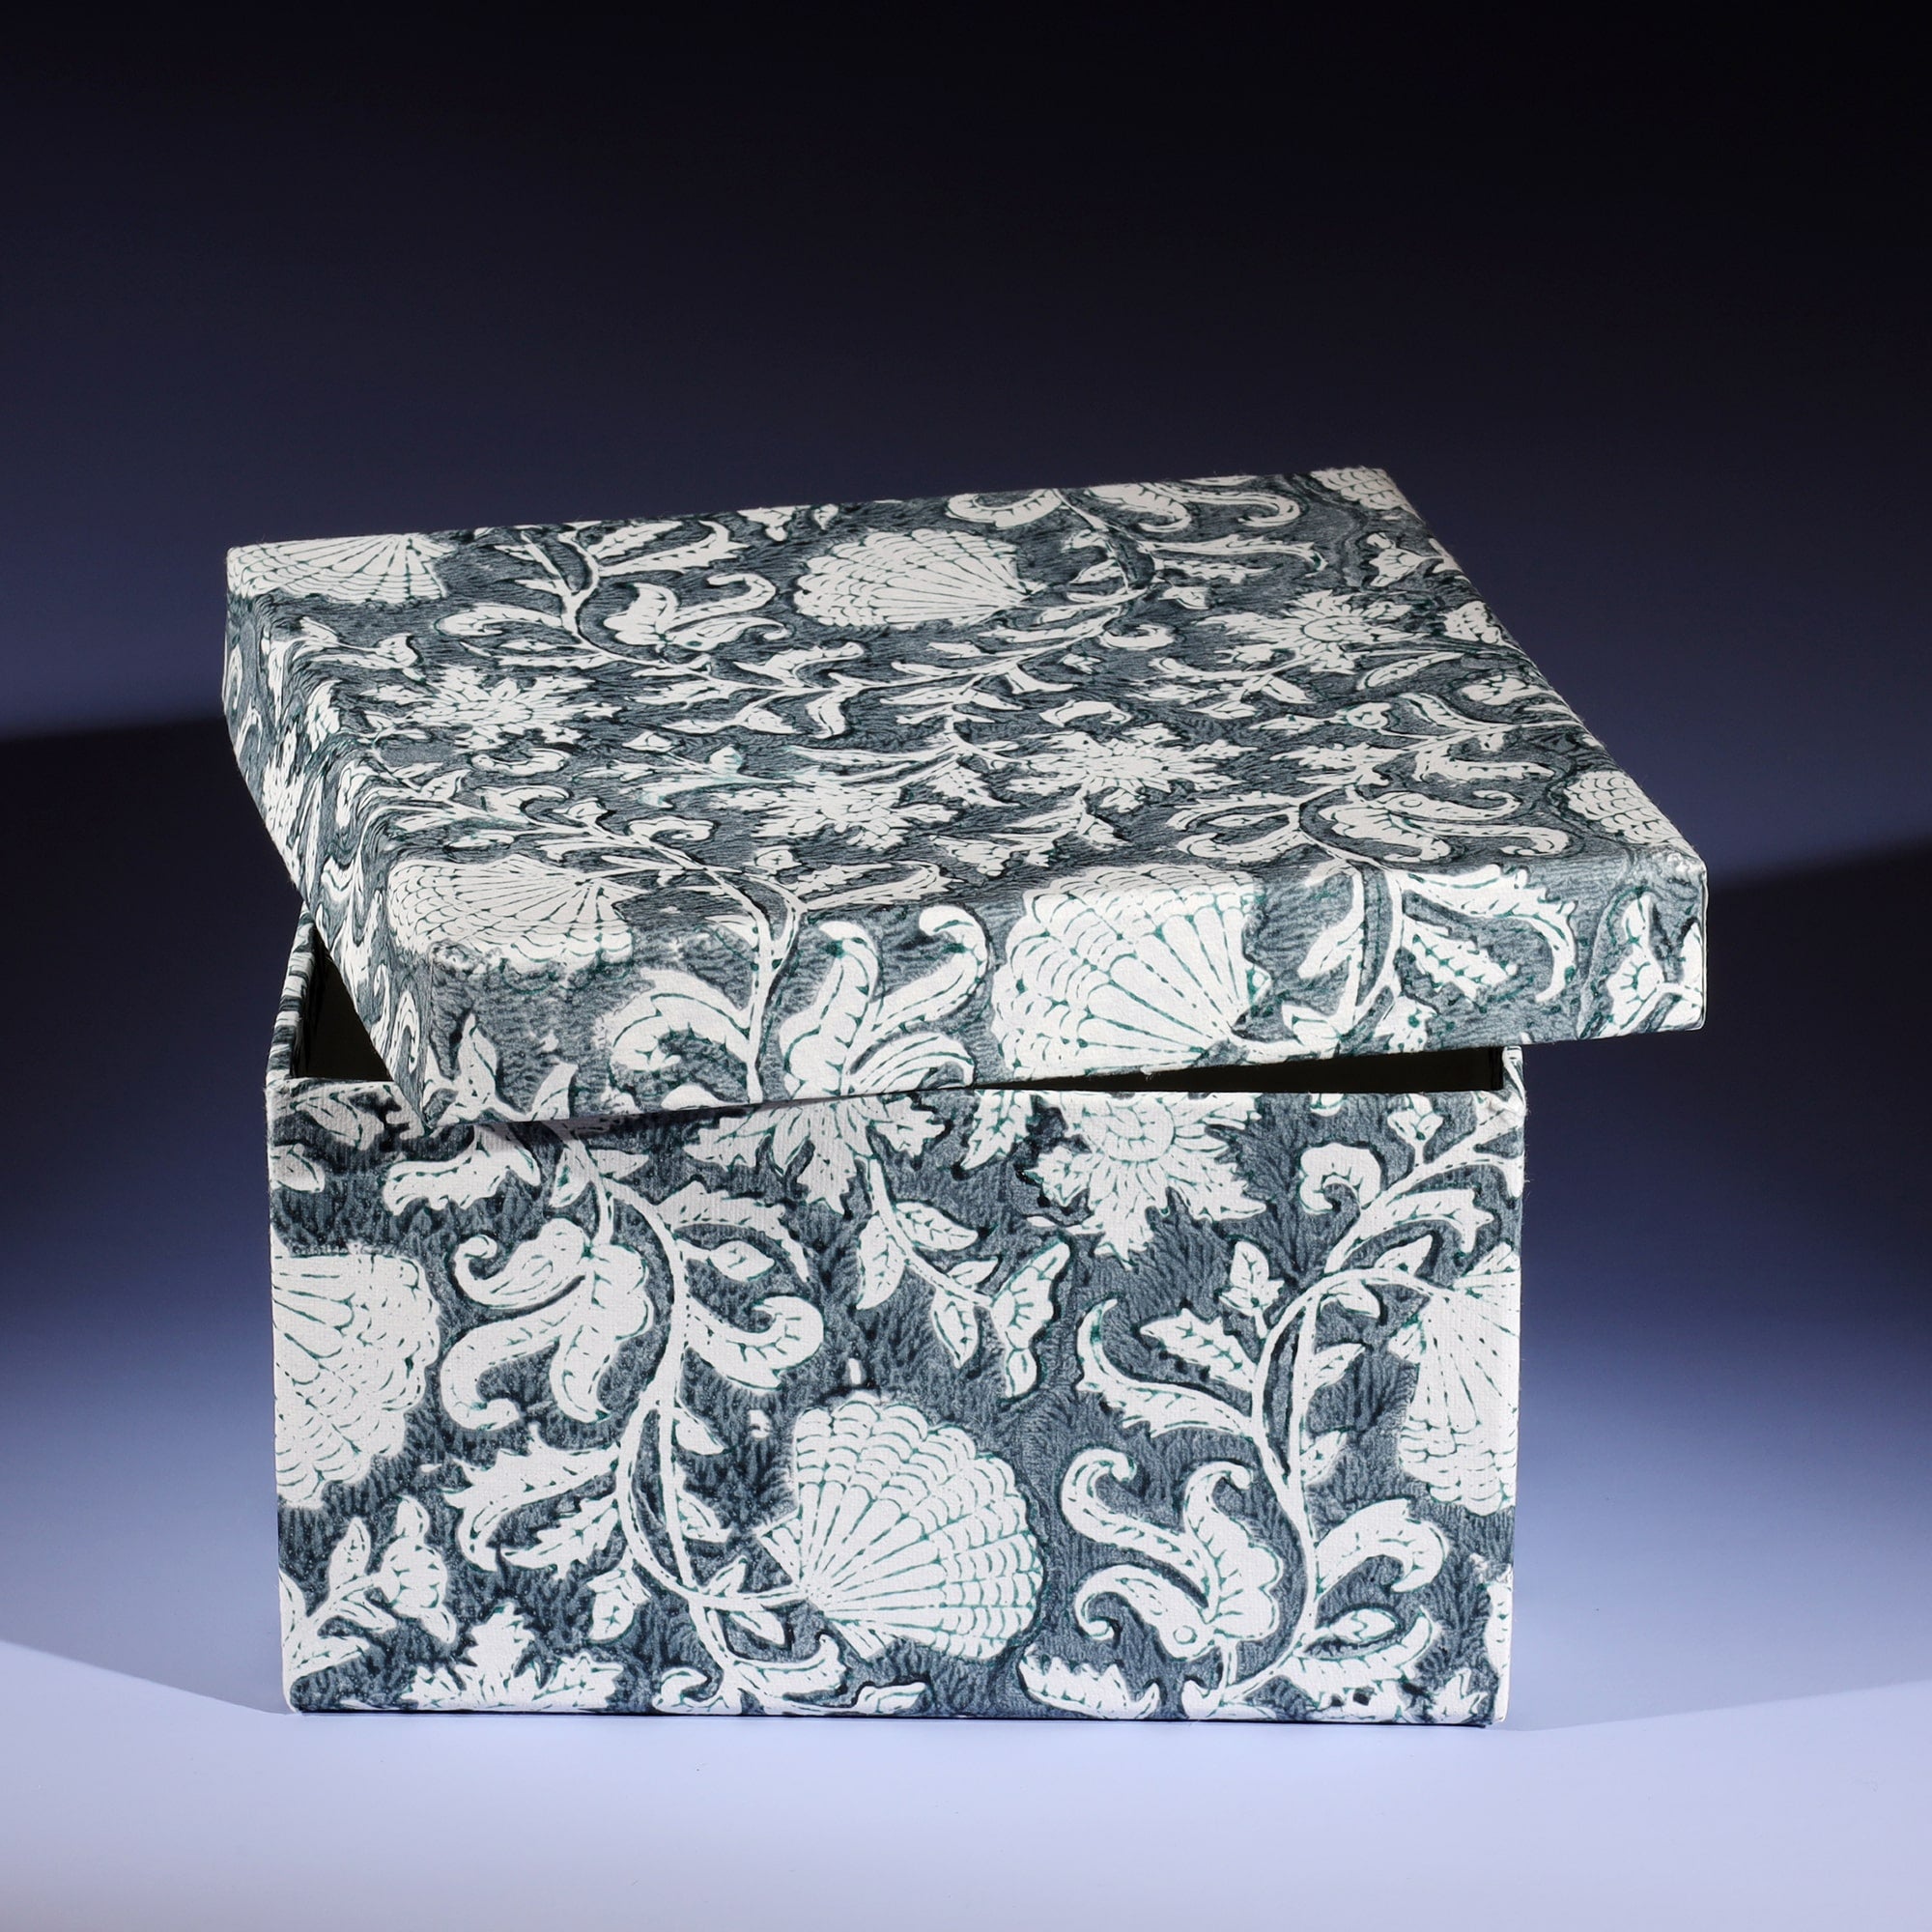 Medium Seashell Flower in Seabreeze hand blocked paper covered box with lid askew